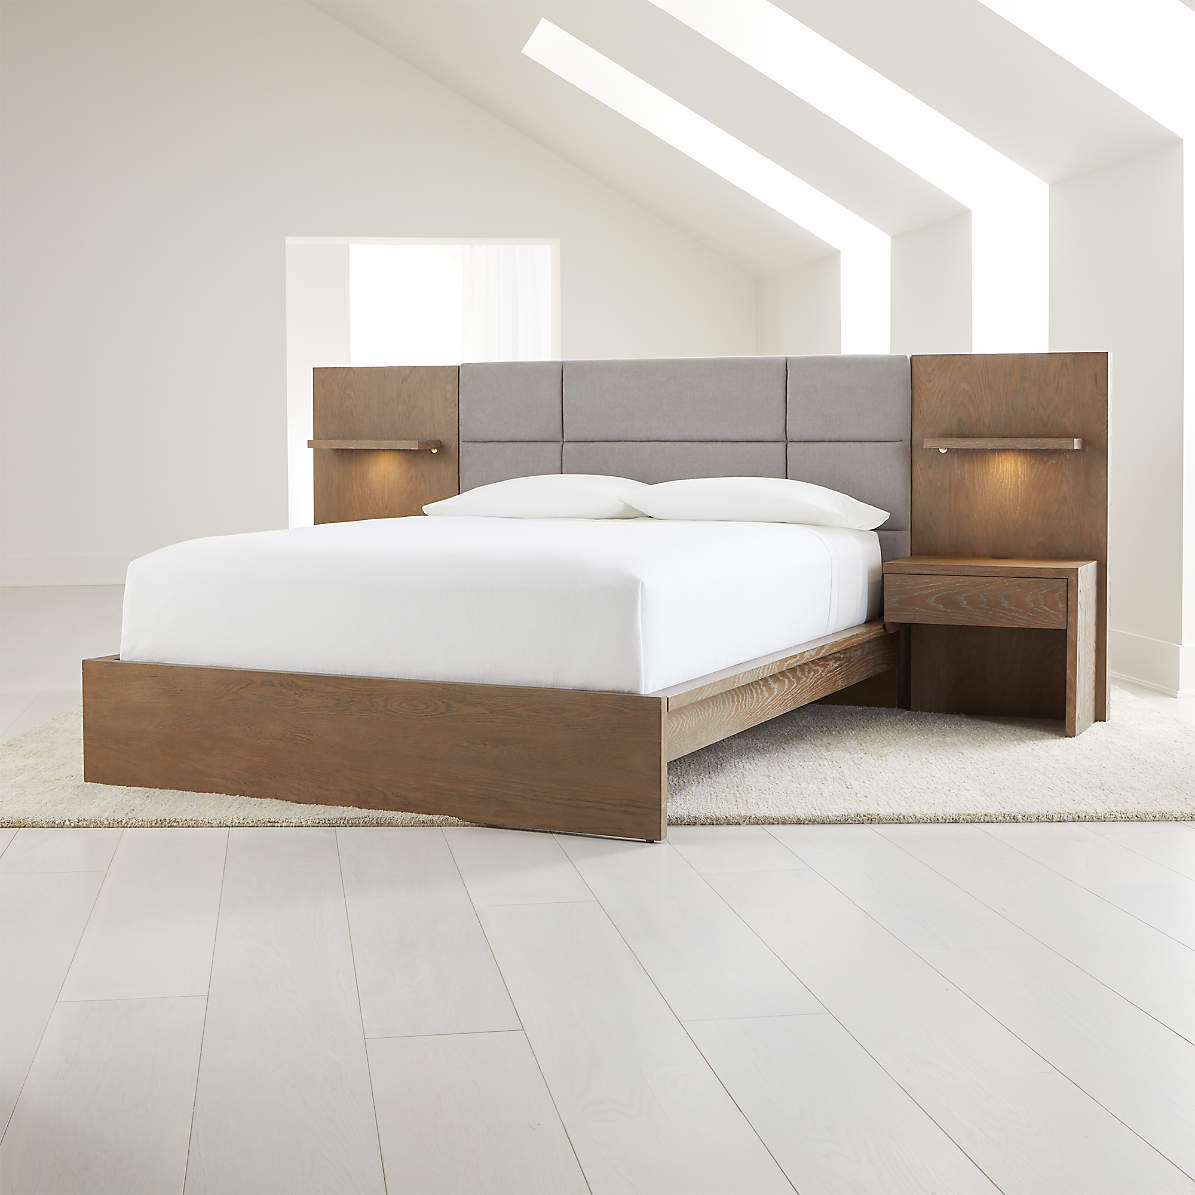 Atlas King Bed With Panel Nightstands, King Size Headboard With Built In Reading Lights